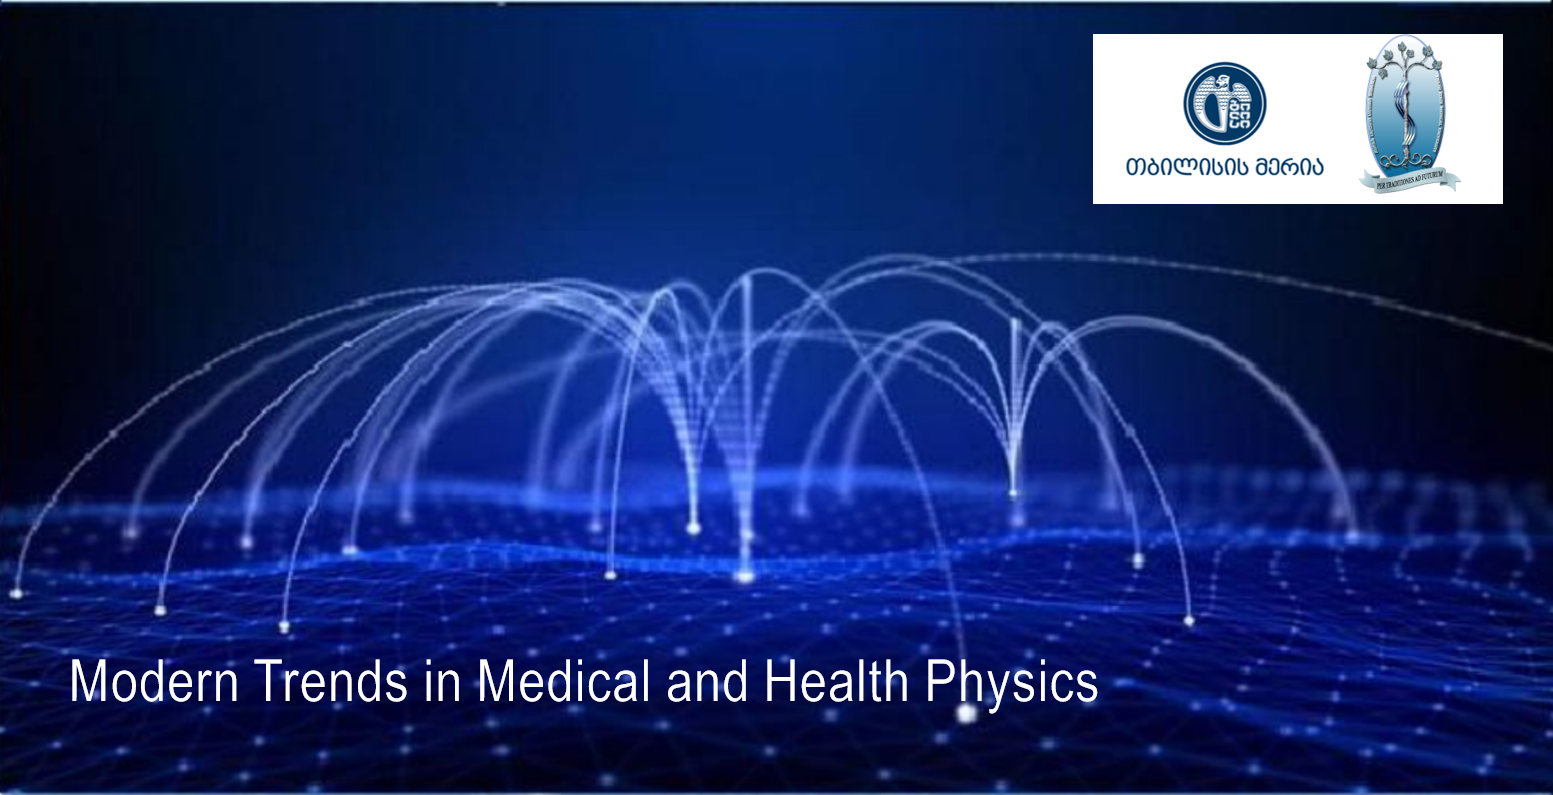 Modern Trends in Medical and Health Physics